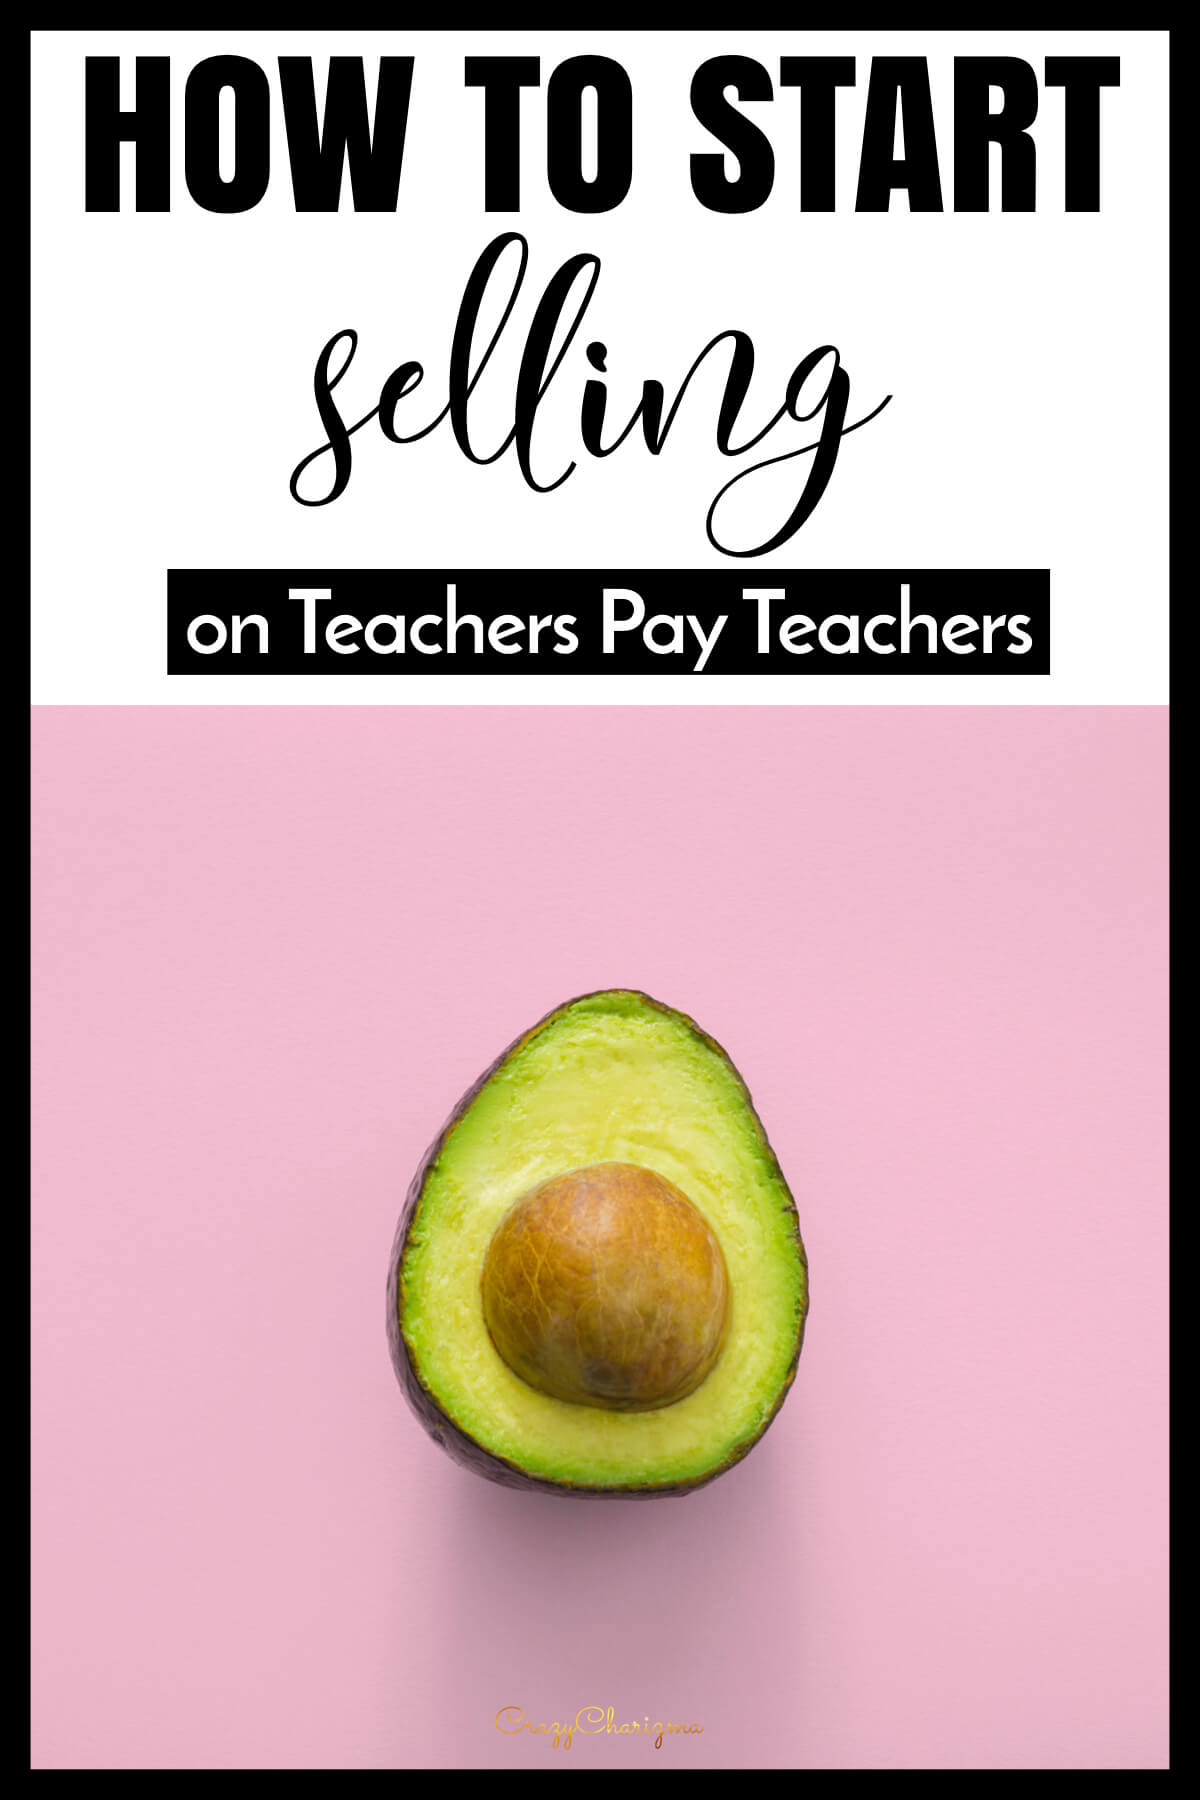 Thinking of selling your teacher resources? Read the post about getting started on Teachers Pay Teachers.